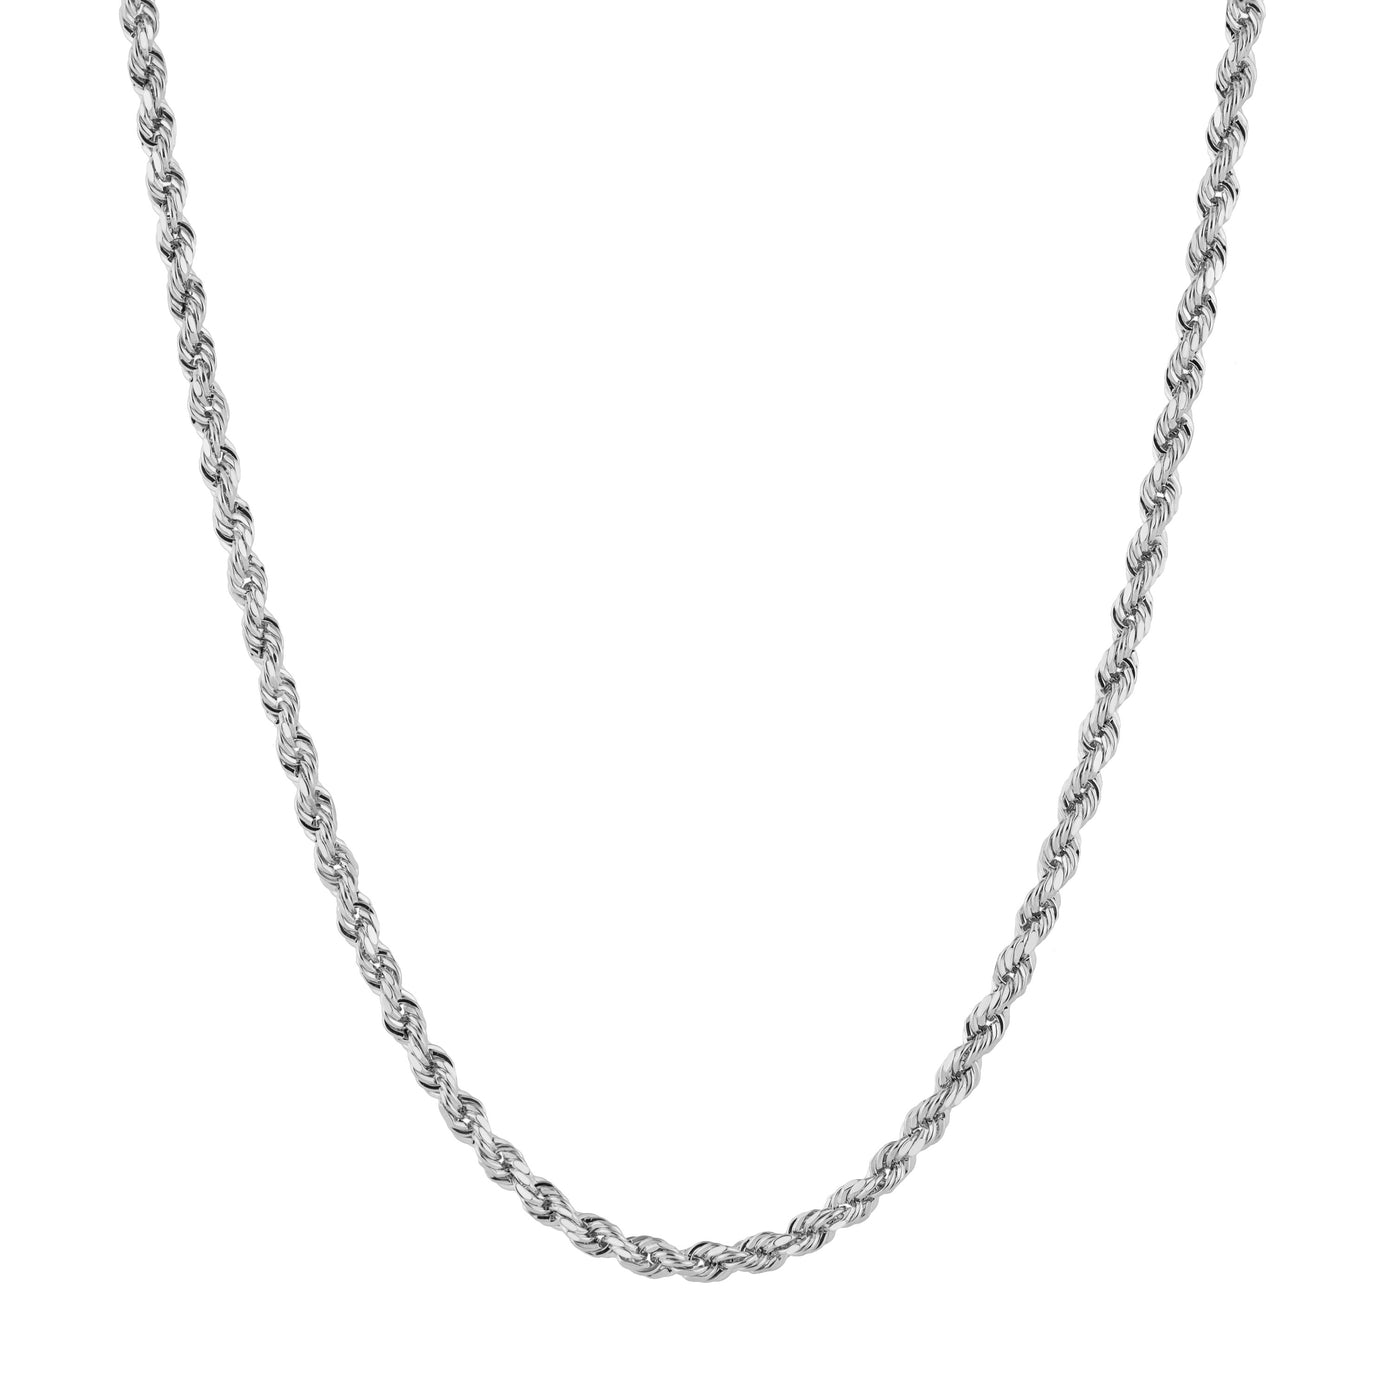 Rope Chain Necklace 10K White Gold - Hollow